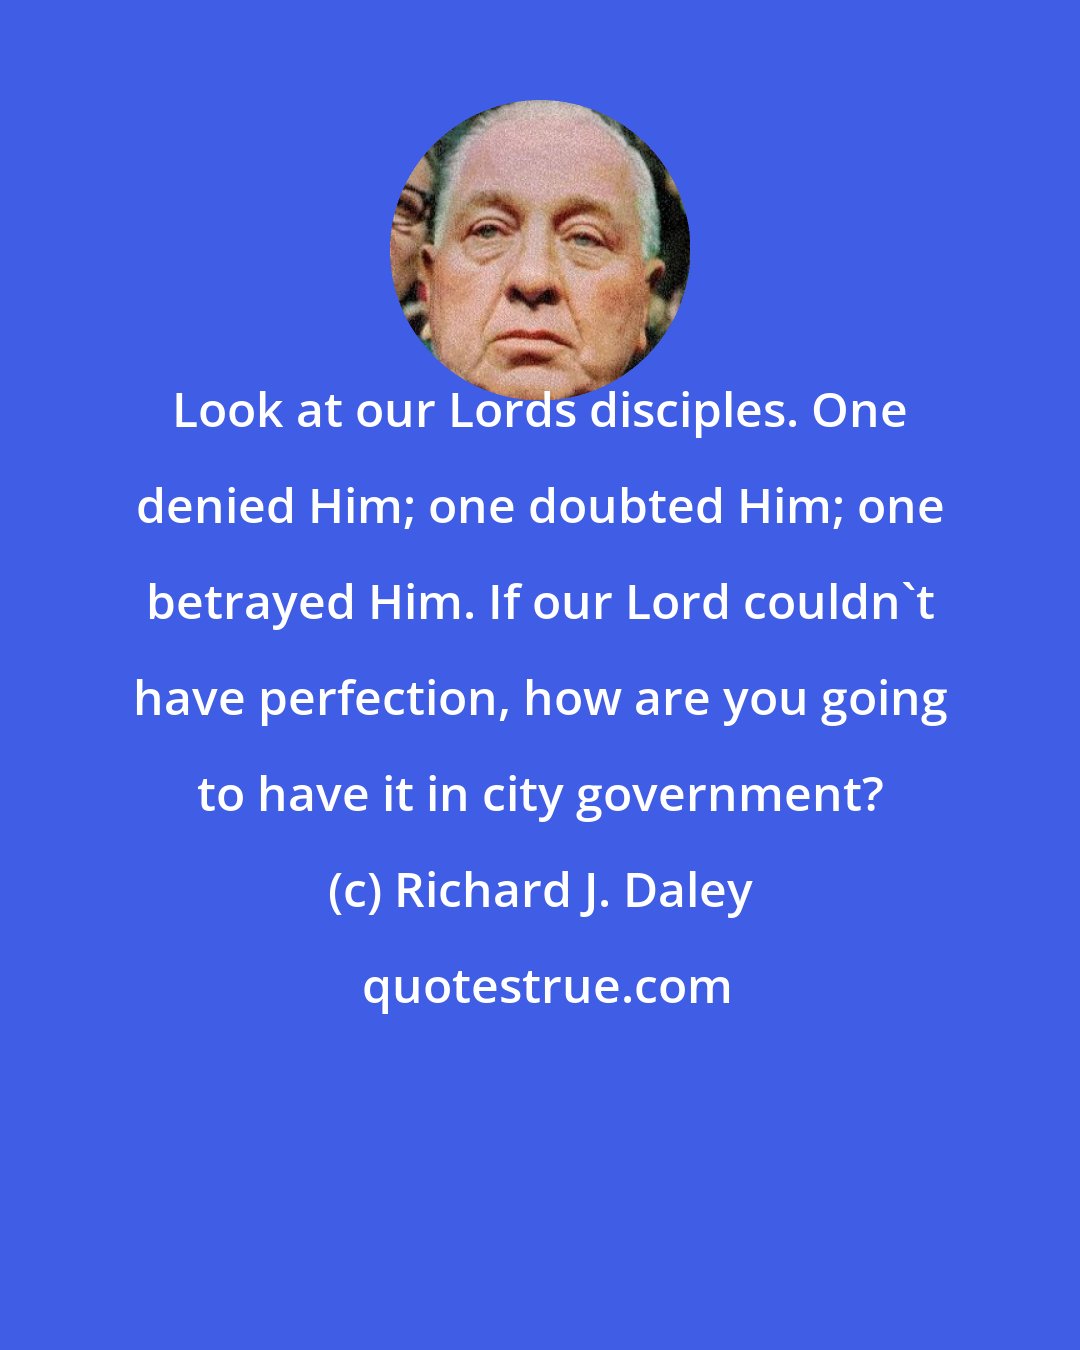 Richard J. Daley: Look at our Lords disciples. One denied Him; one doubted Him; one betrayed Him. If our Lord couldn't have perfection, how are you going to have it in city government?